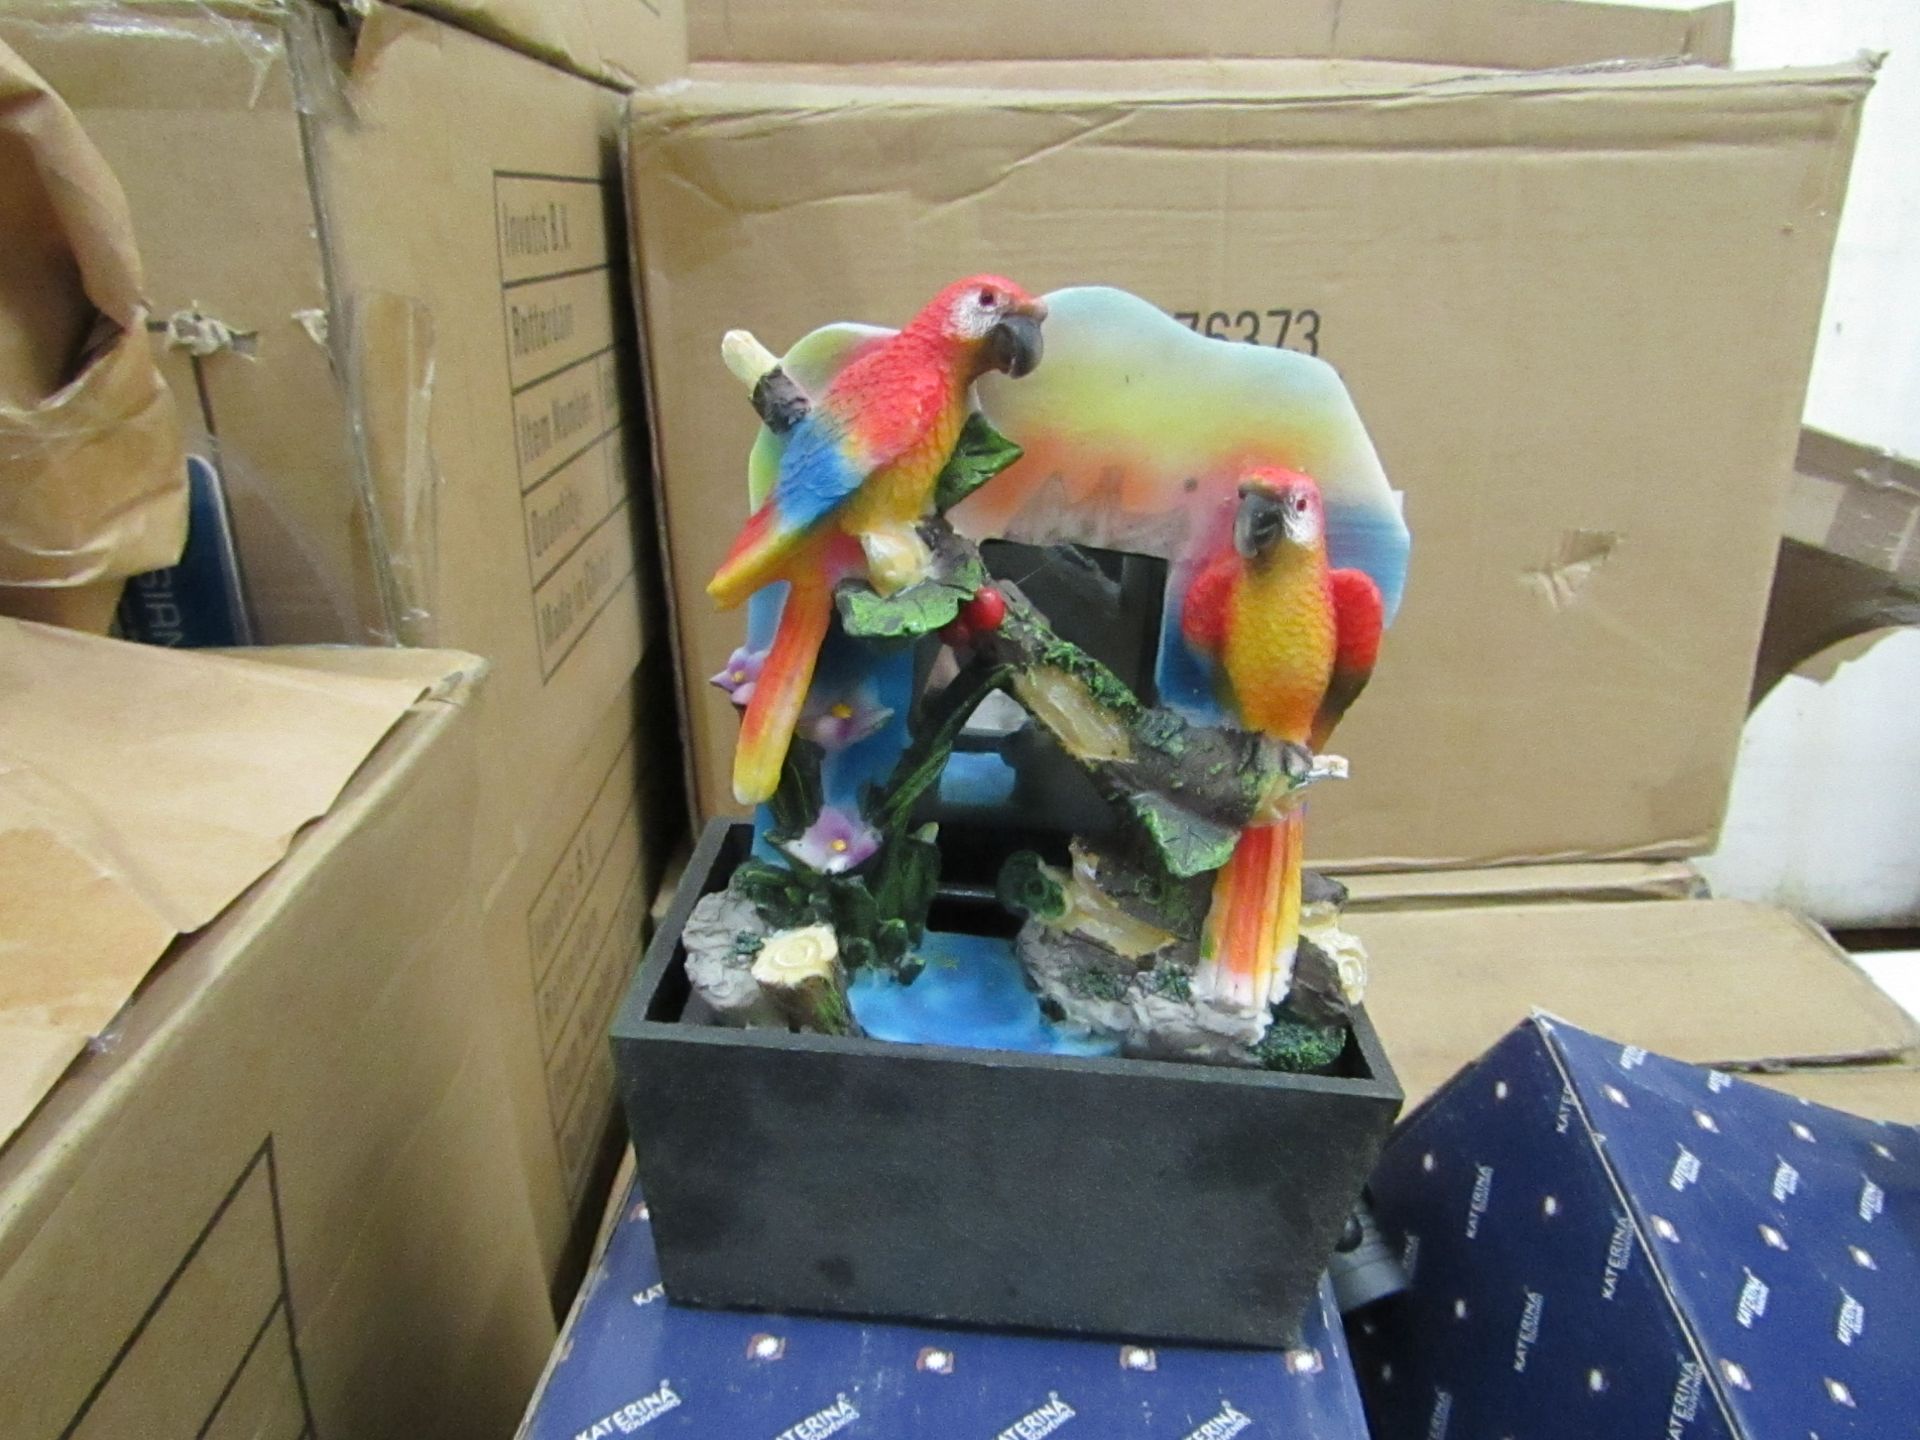 10x Katerina Souvenirs - Small Table Top Amazon Parrot Themed Water Feature - Unchecked & Boxed.